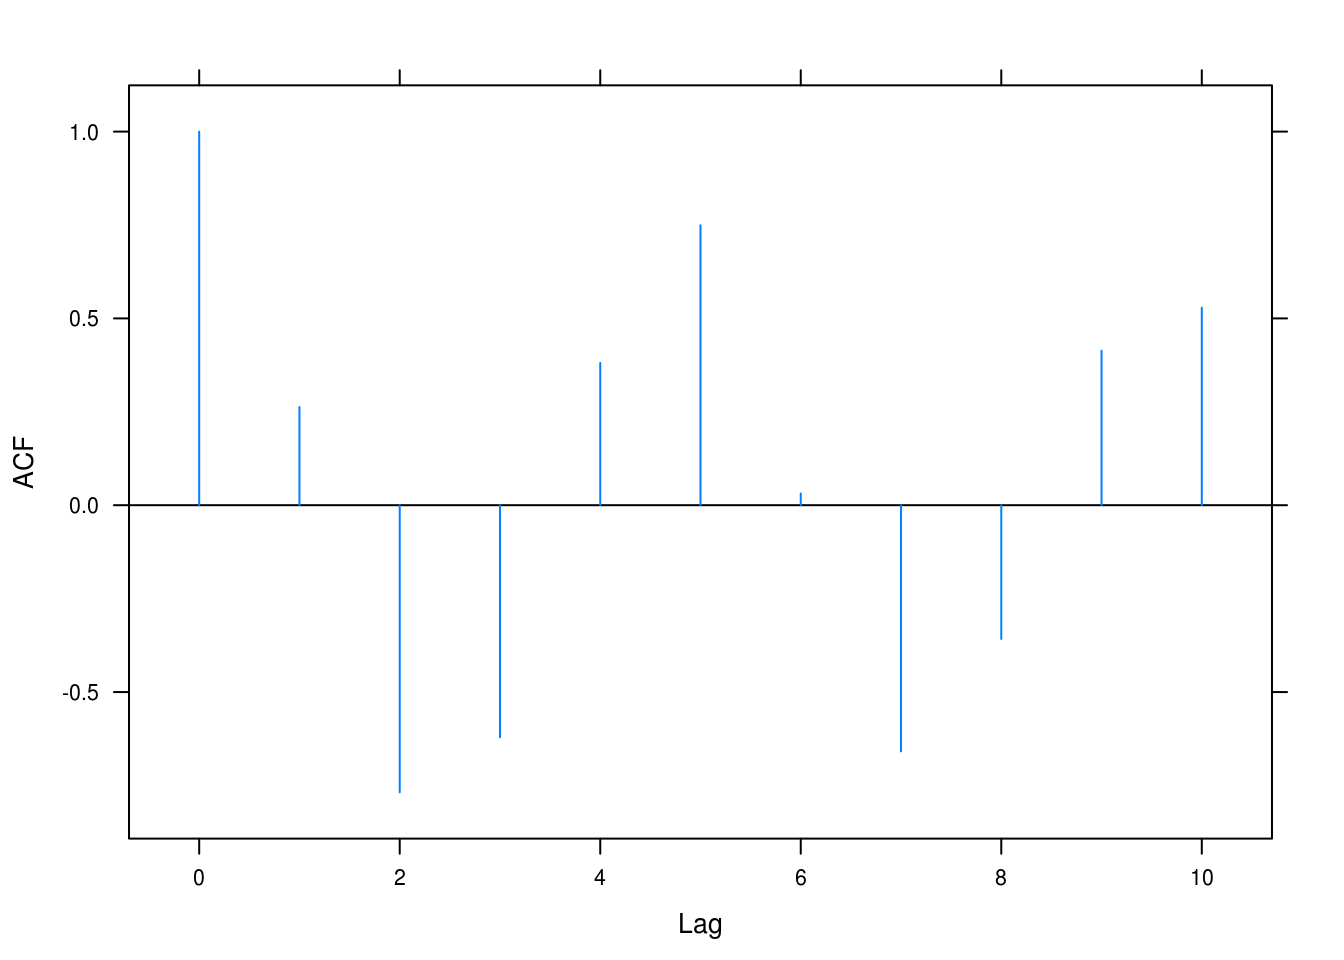 ACF for AR(2) with $\phi_1 = 0.5, \phi_2 = -0.9$.